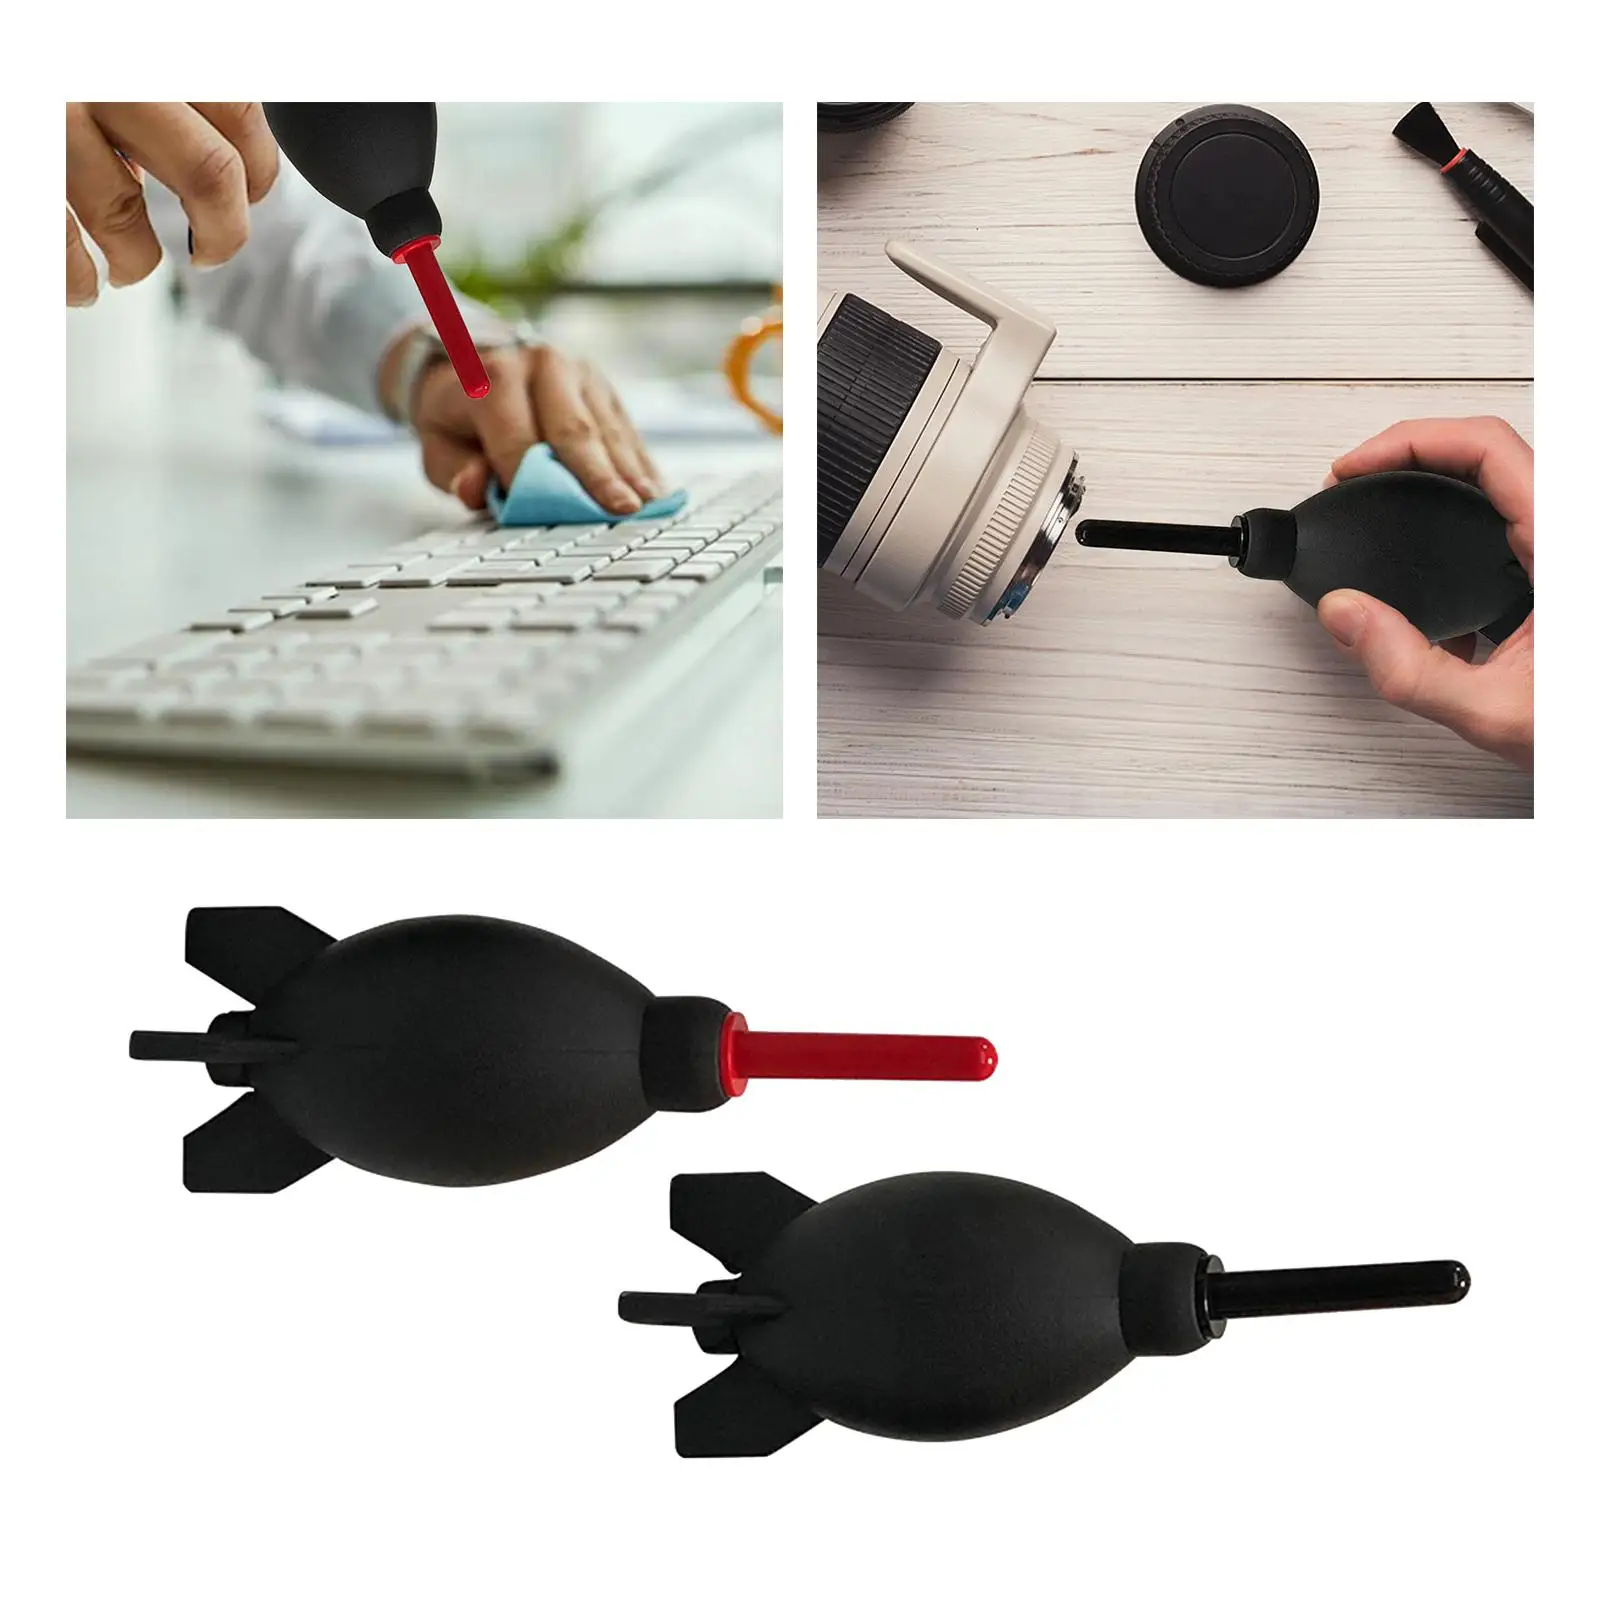 Rocket Blaster Air Duster Dust Cleaning Accessory Tool Rubber Durable Rocket Shape Air Blower for Camera Lens Computer